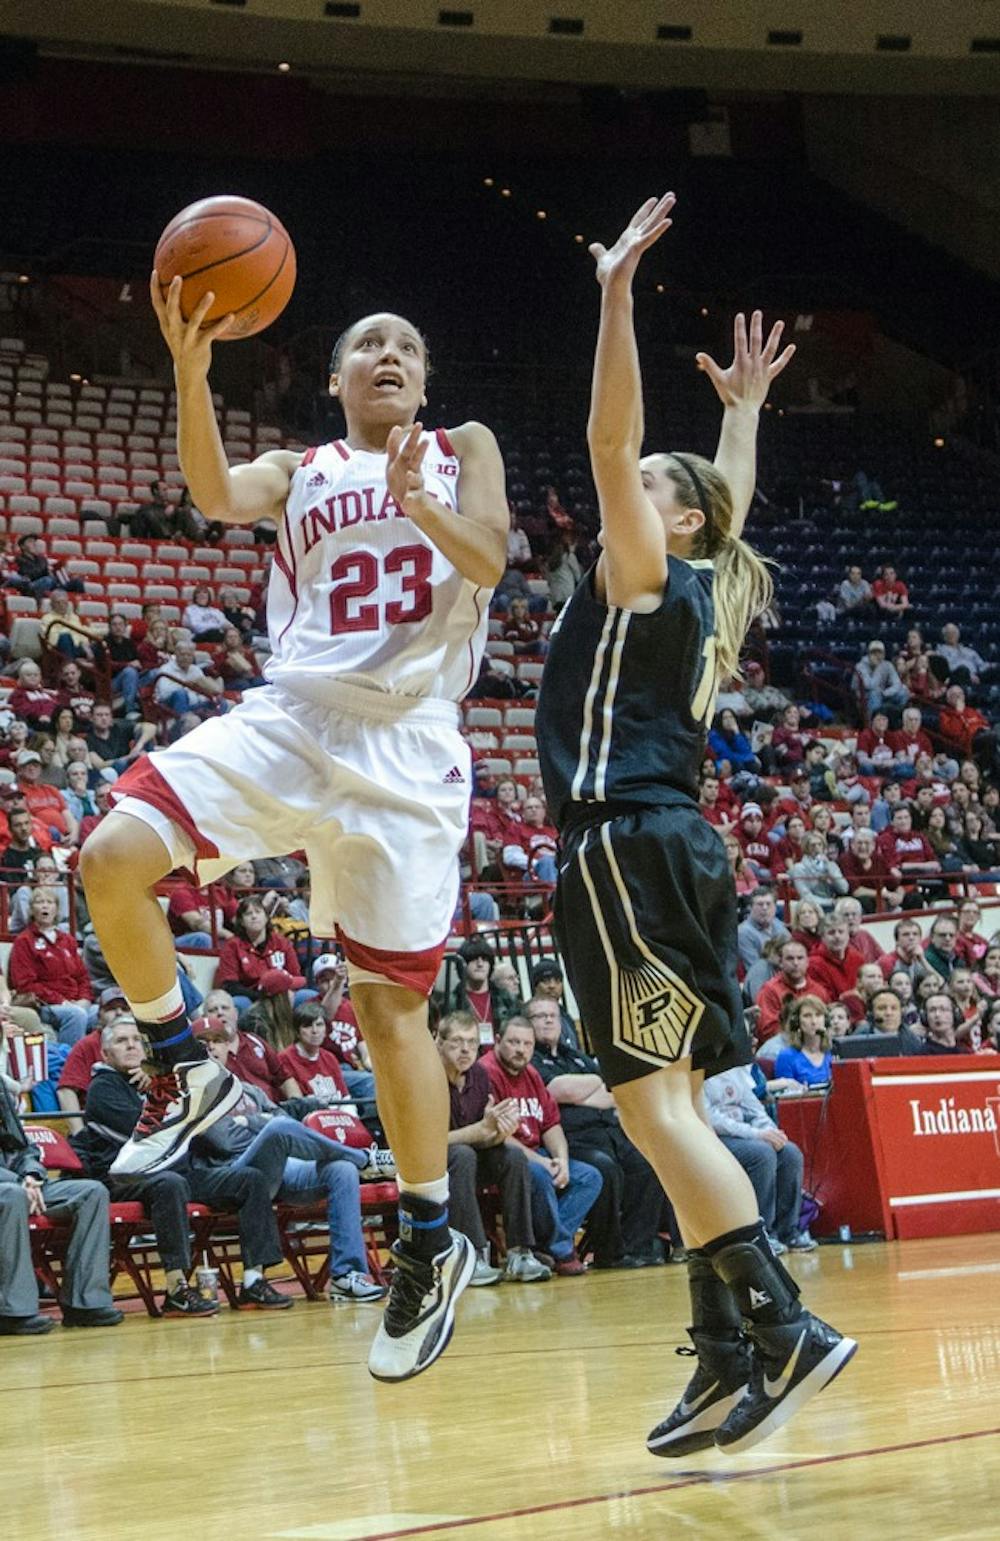 Sophomore guard Alexis Gassion attempts a layup against Purdue at Assembly Hall on Monday.
IU won 72-55 and will play its next game against Northwestern on Thursday.